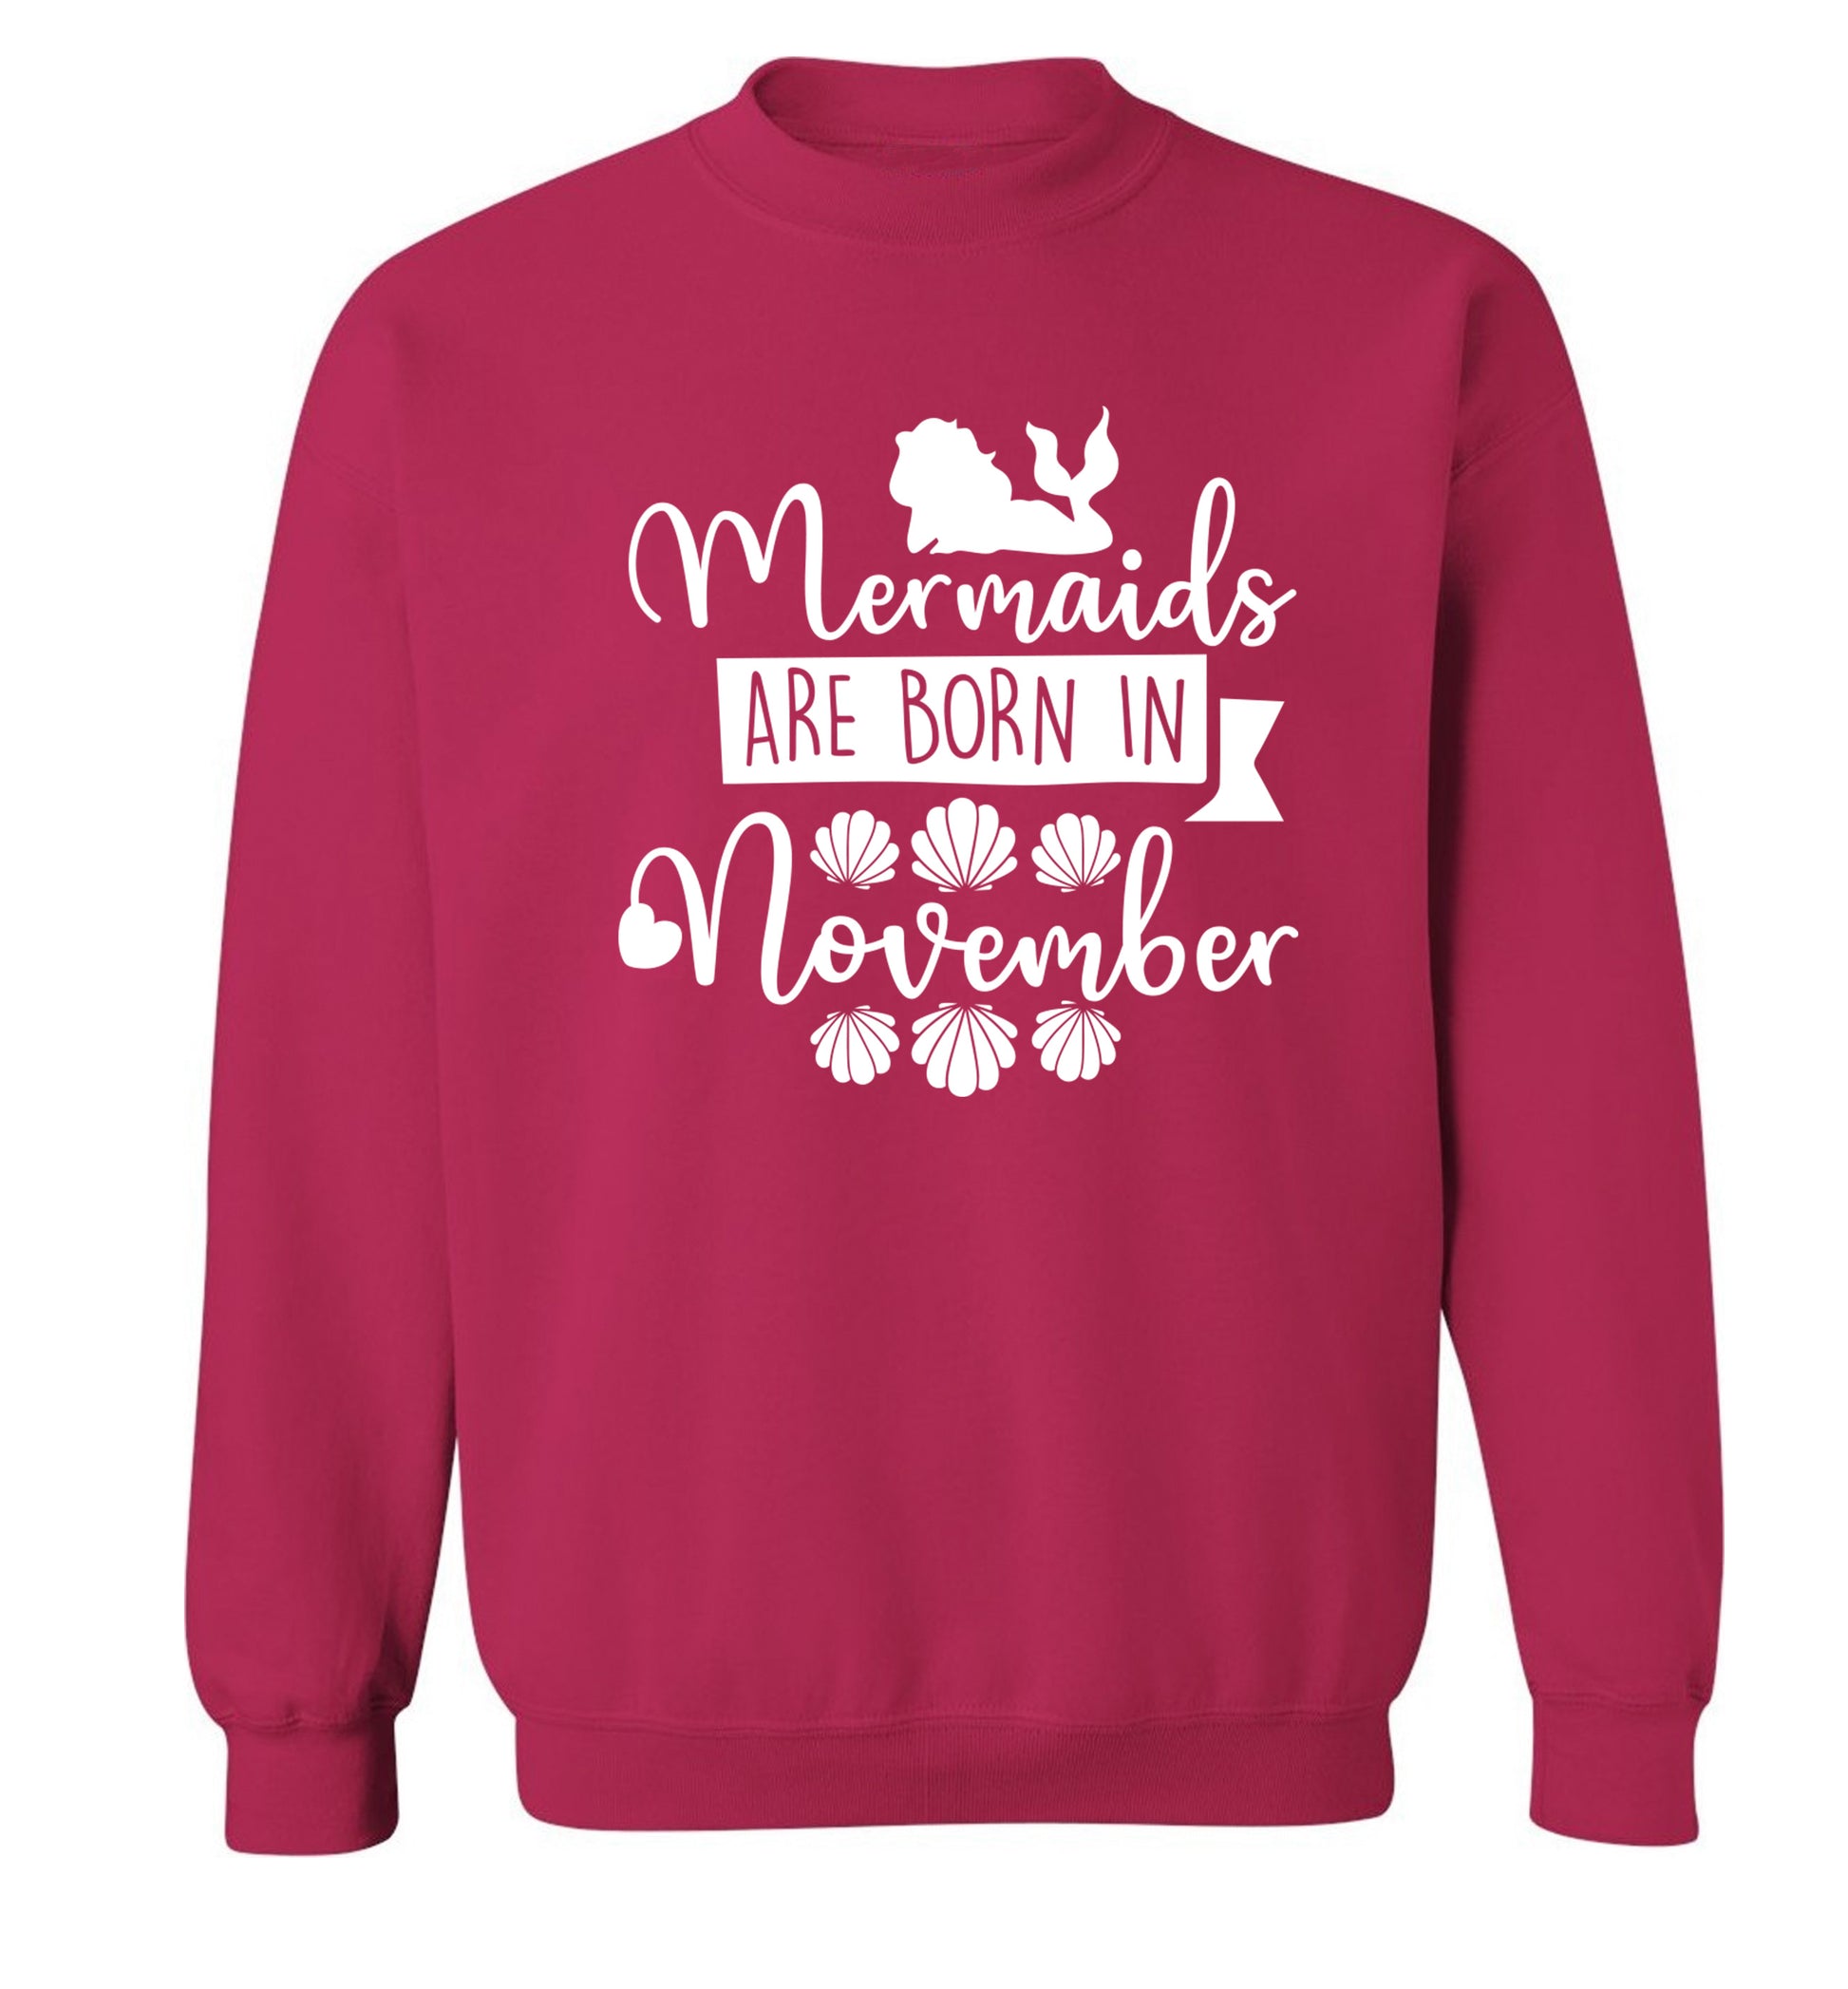 Mermaids are born in November Adult's unisex pink Sweater 2XL